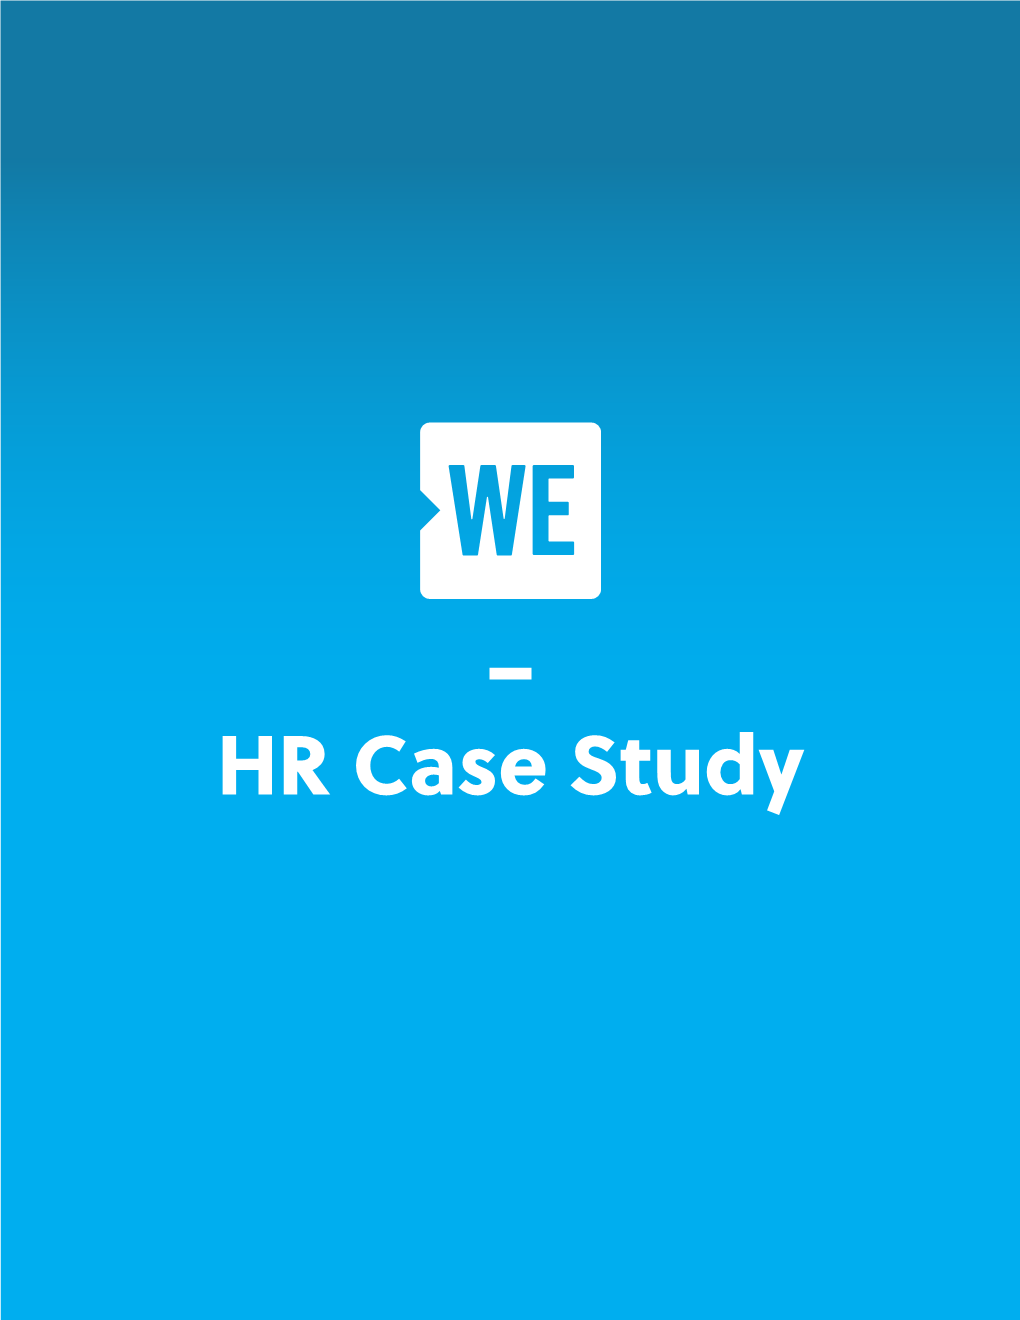 WE Human Resources Case Study